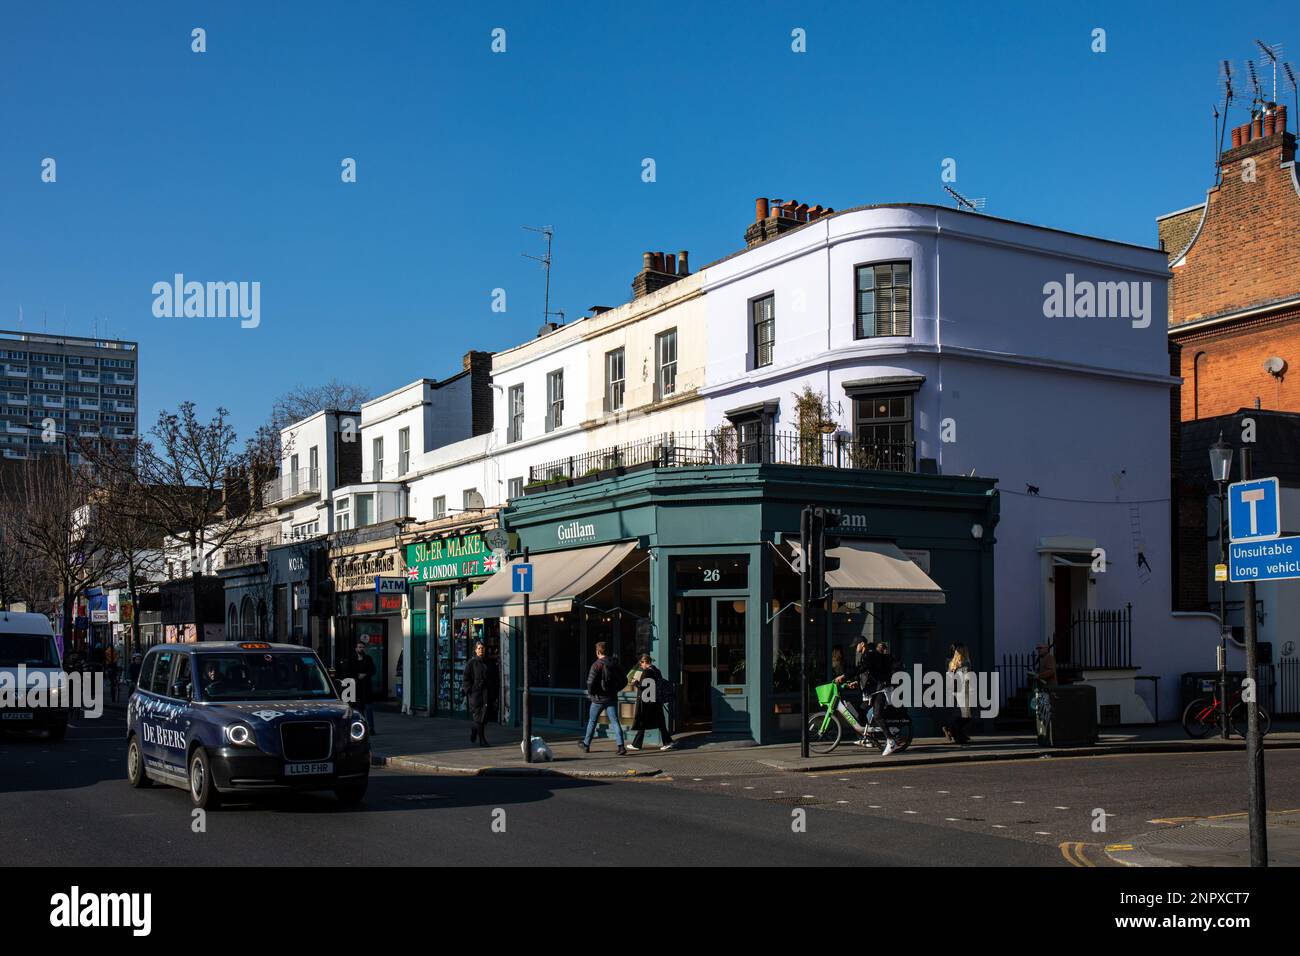 White three-story building against on Notting Hill Gate against clear blue sky Notting Hill district of London, England Stock Photo